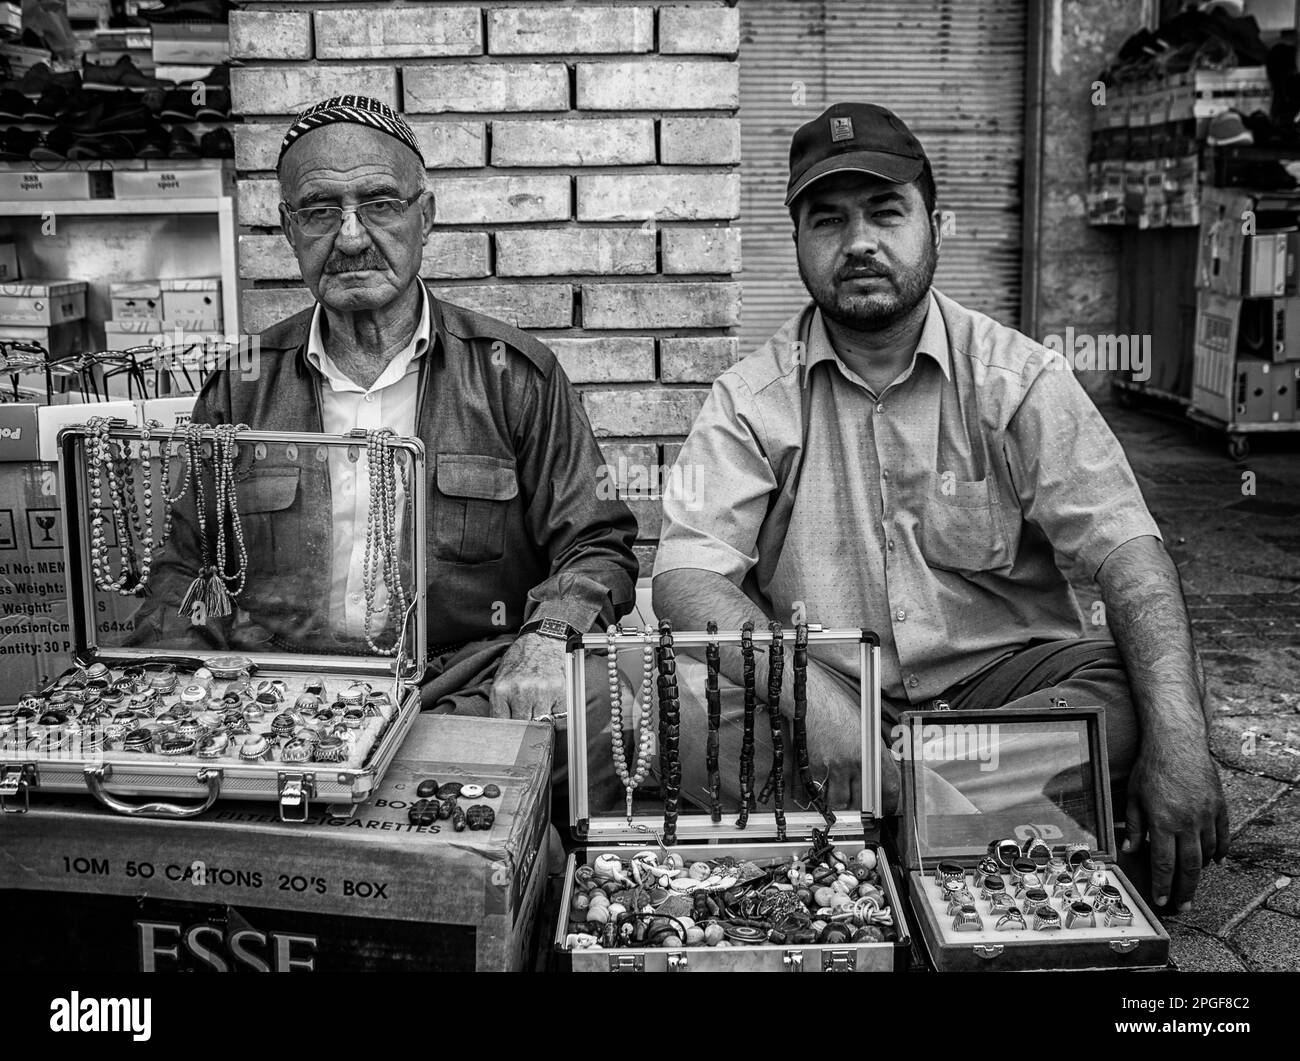 The Jewellery street vendors and shops in Erbil City. Iraq. Stock Photo